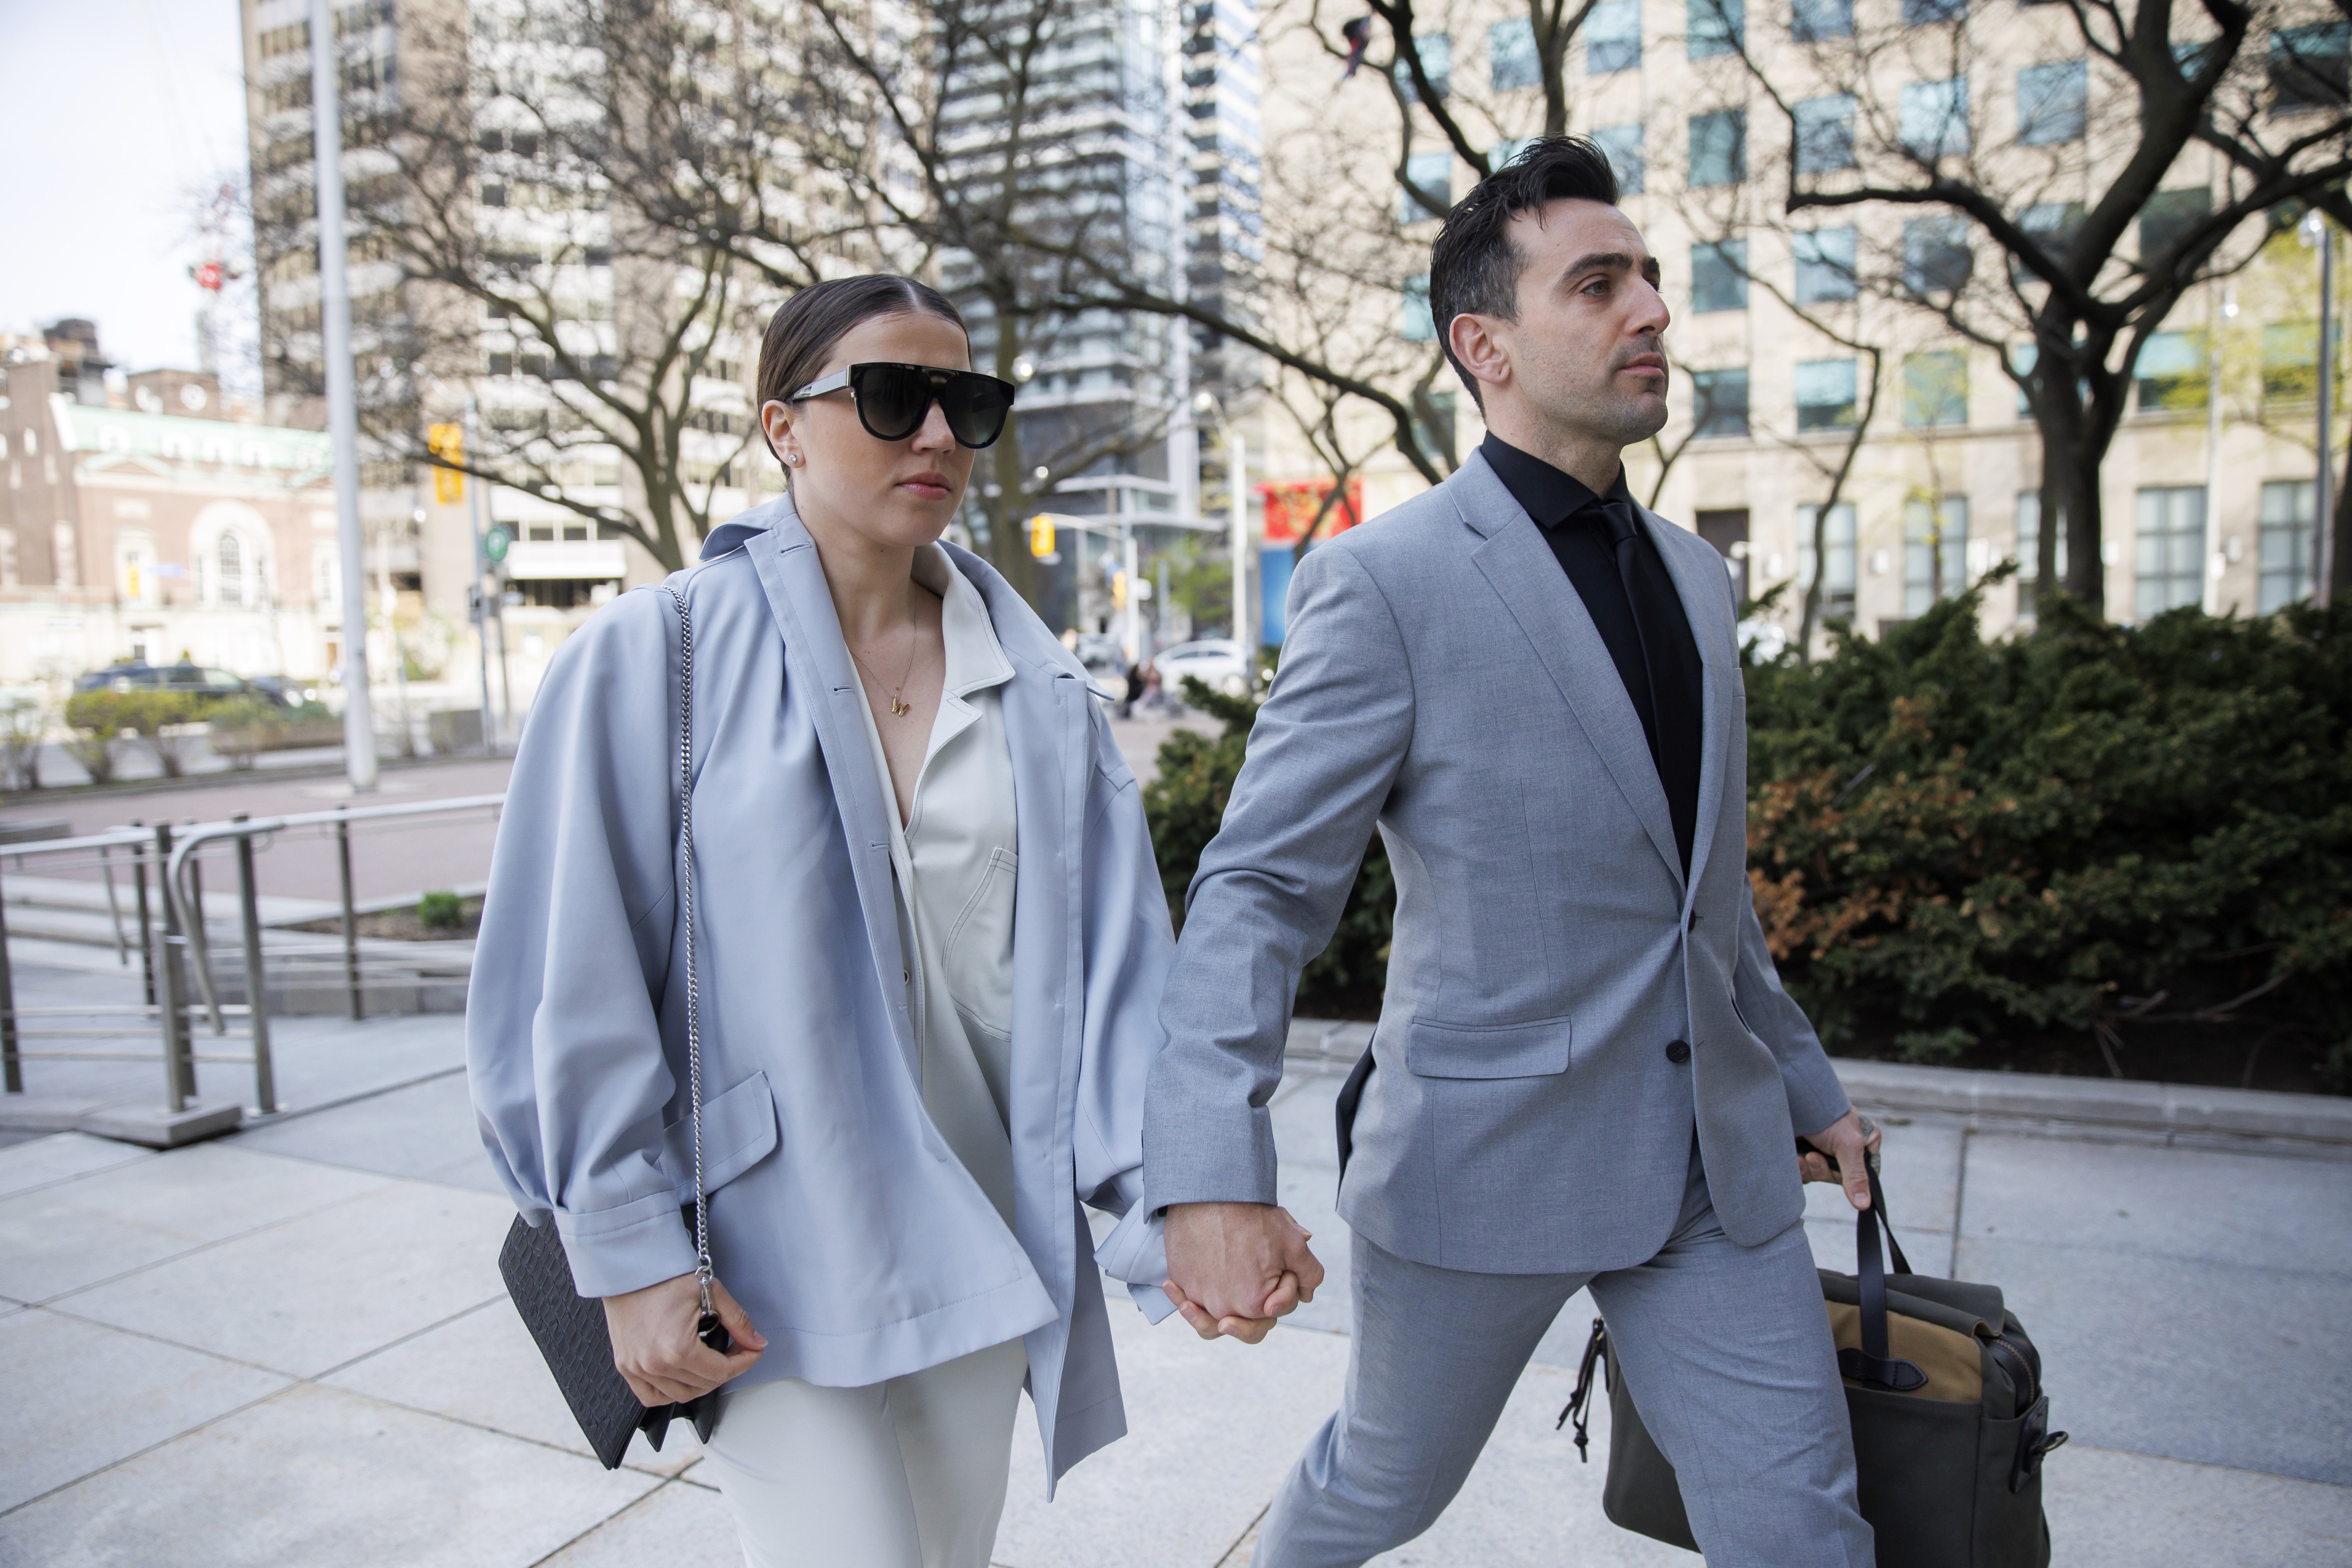 Hedley singer Jacob Hoggard facing new sexual assault charge